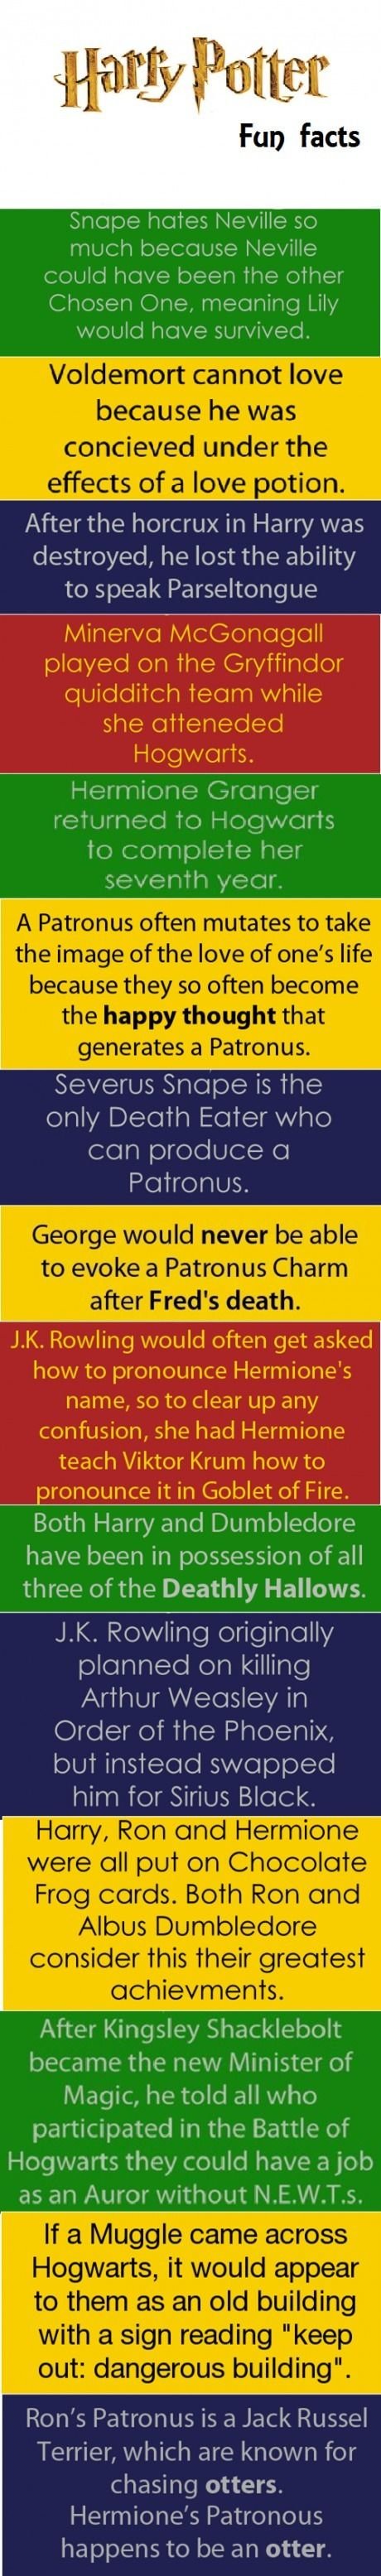 Harry Potter facts you probably didn't know.